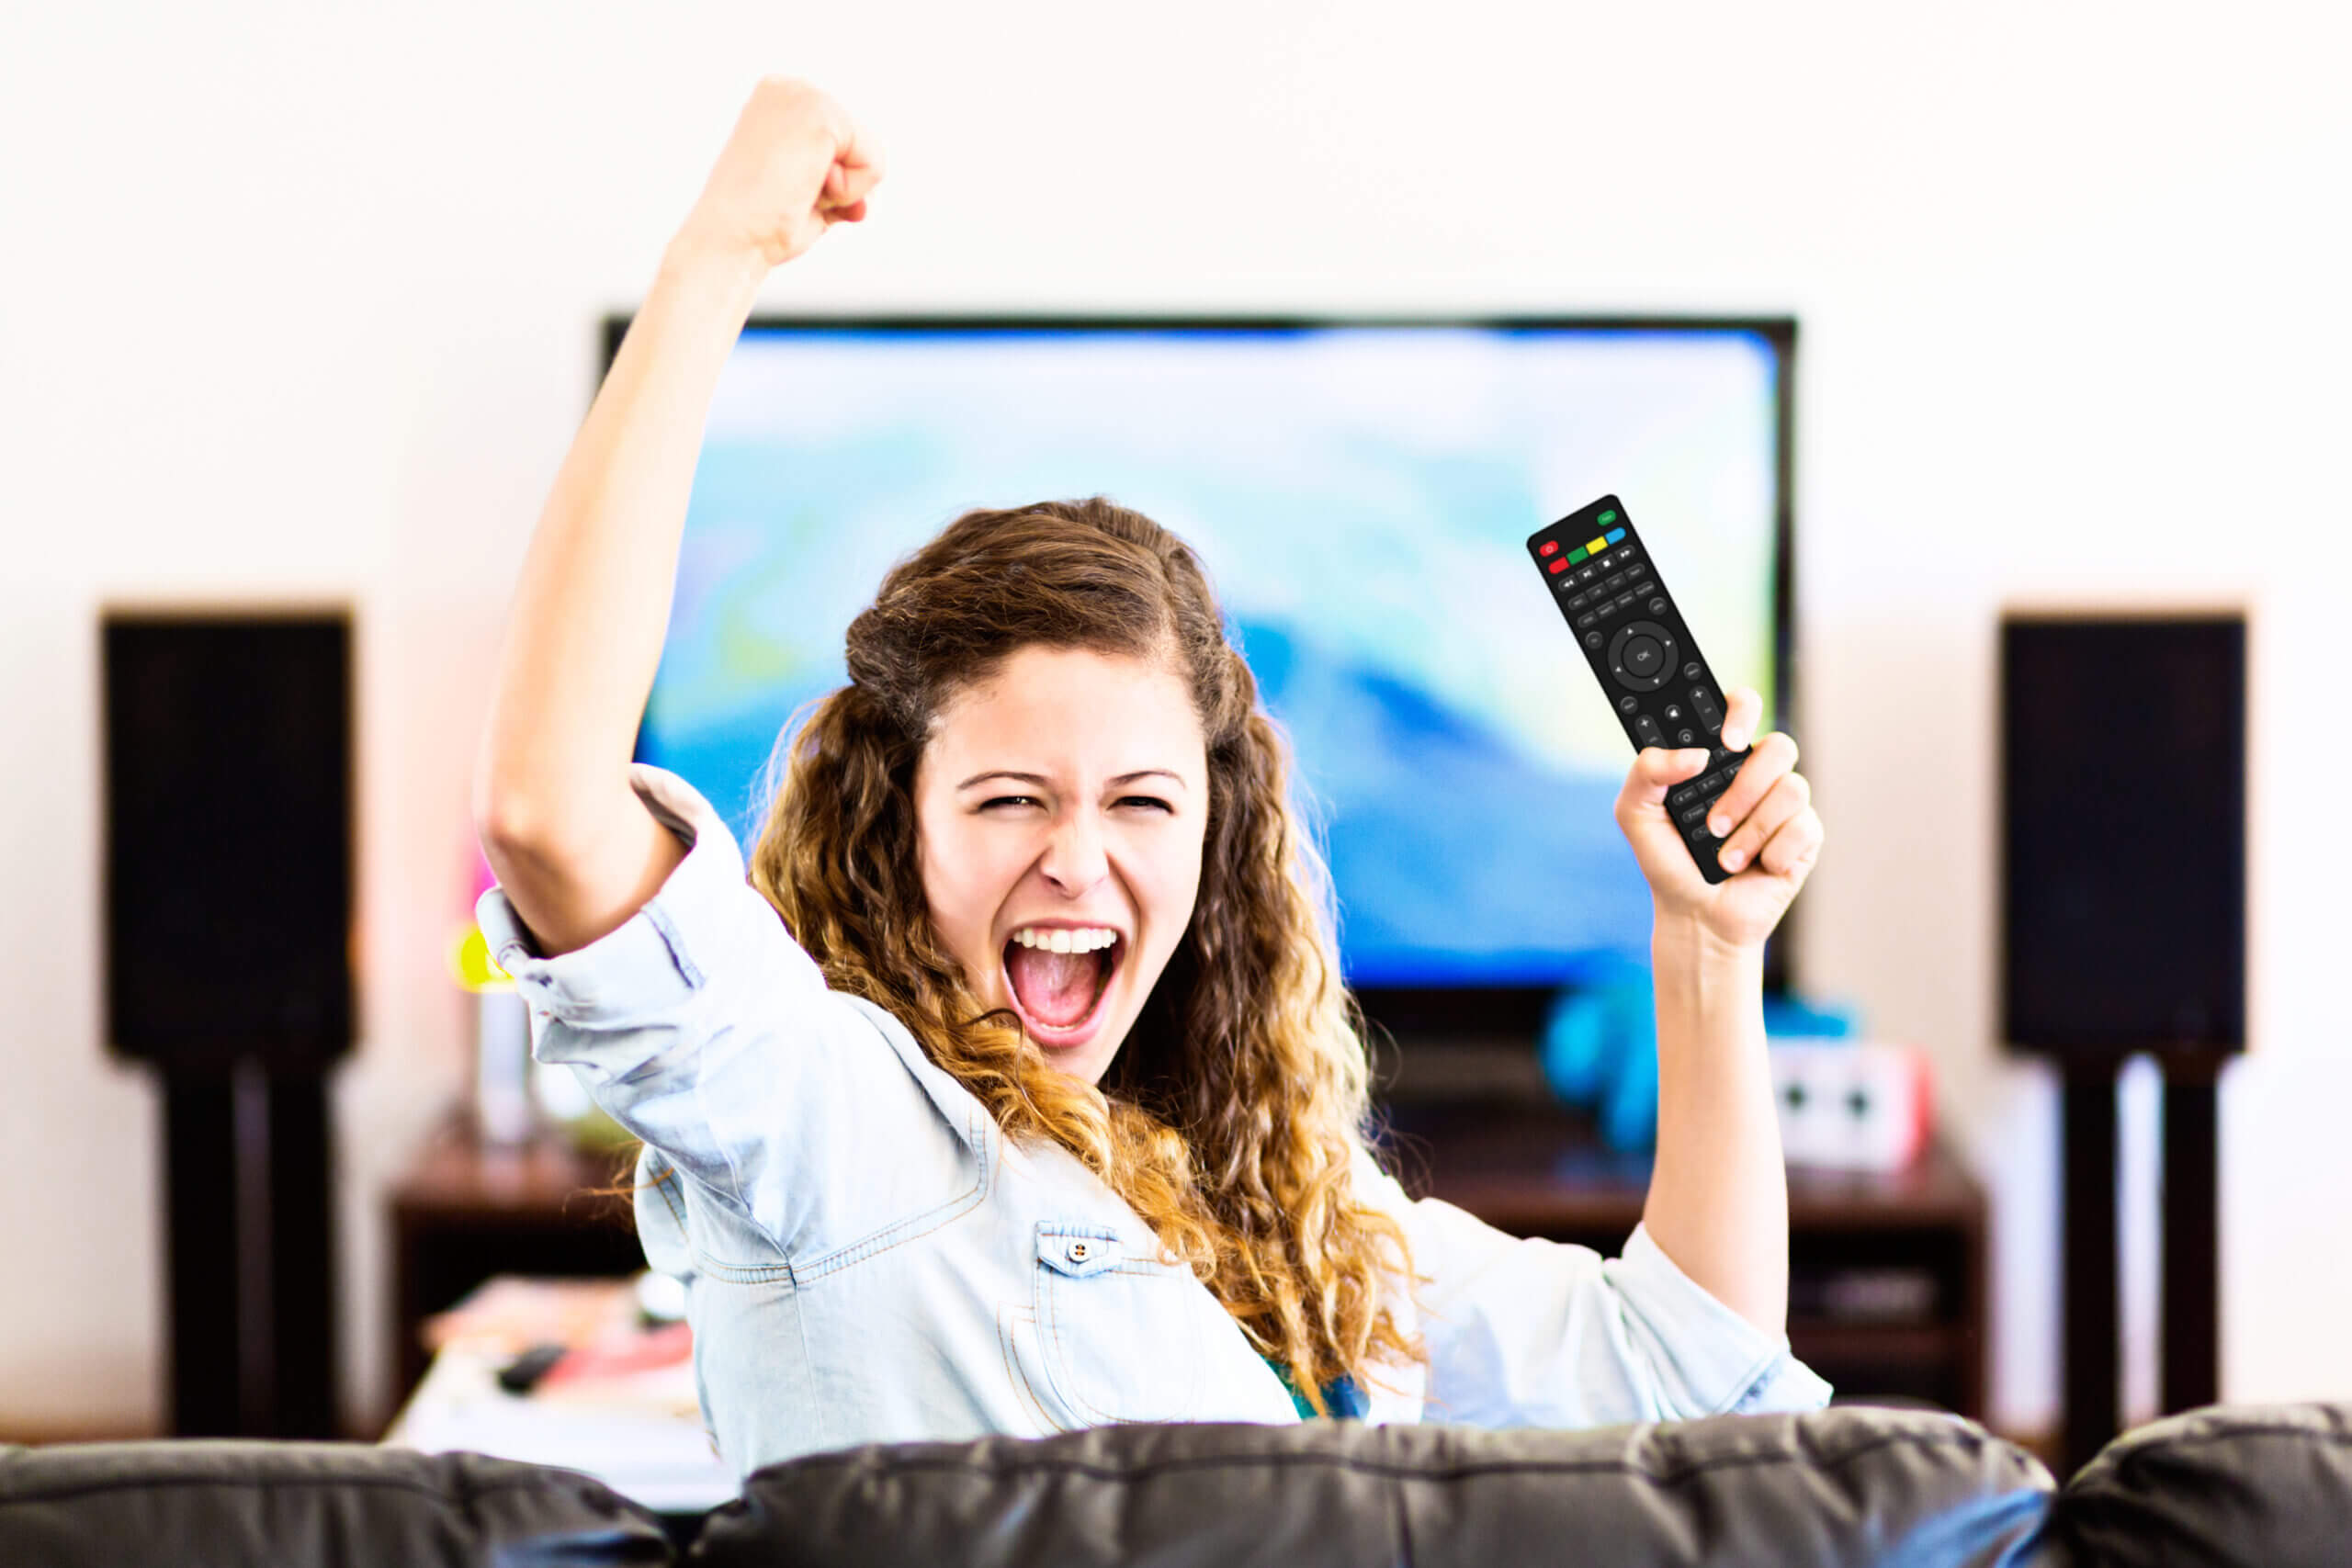 Enthusiastic young female spectator turns from TV cheering triumphantly